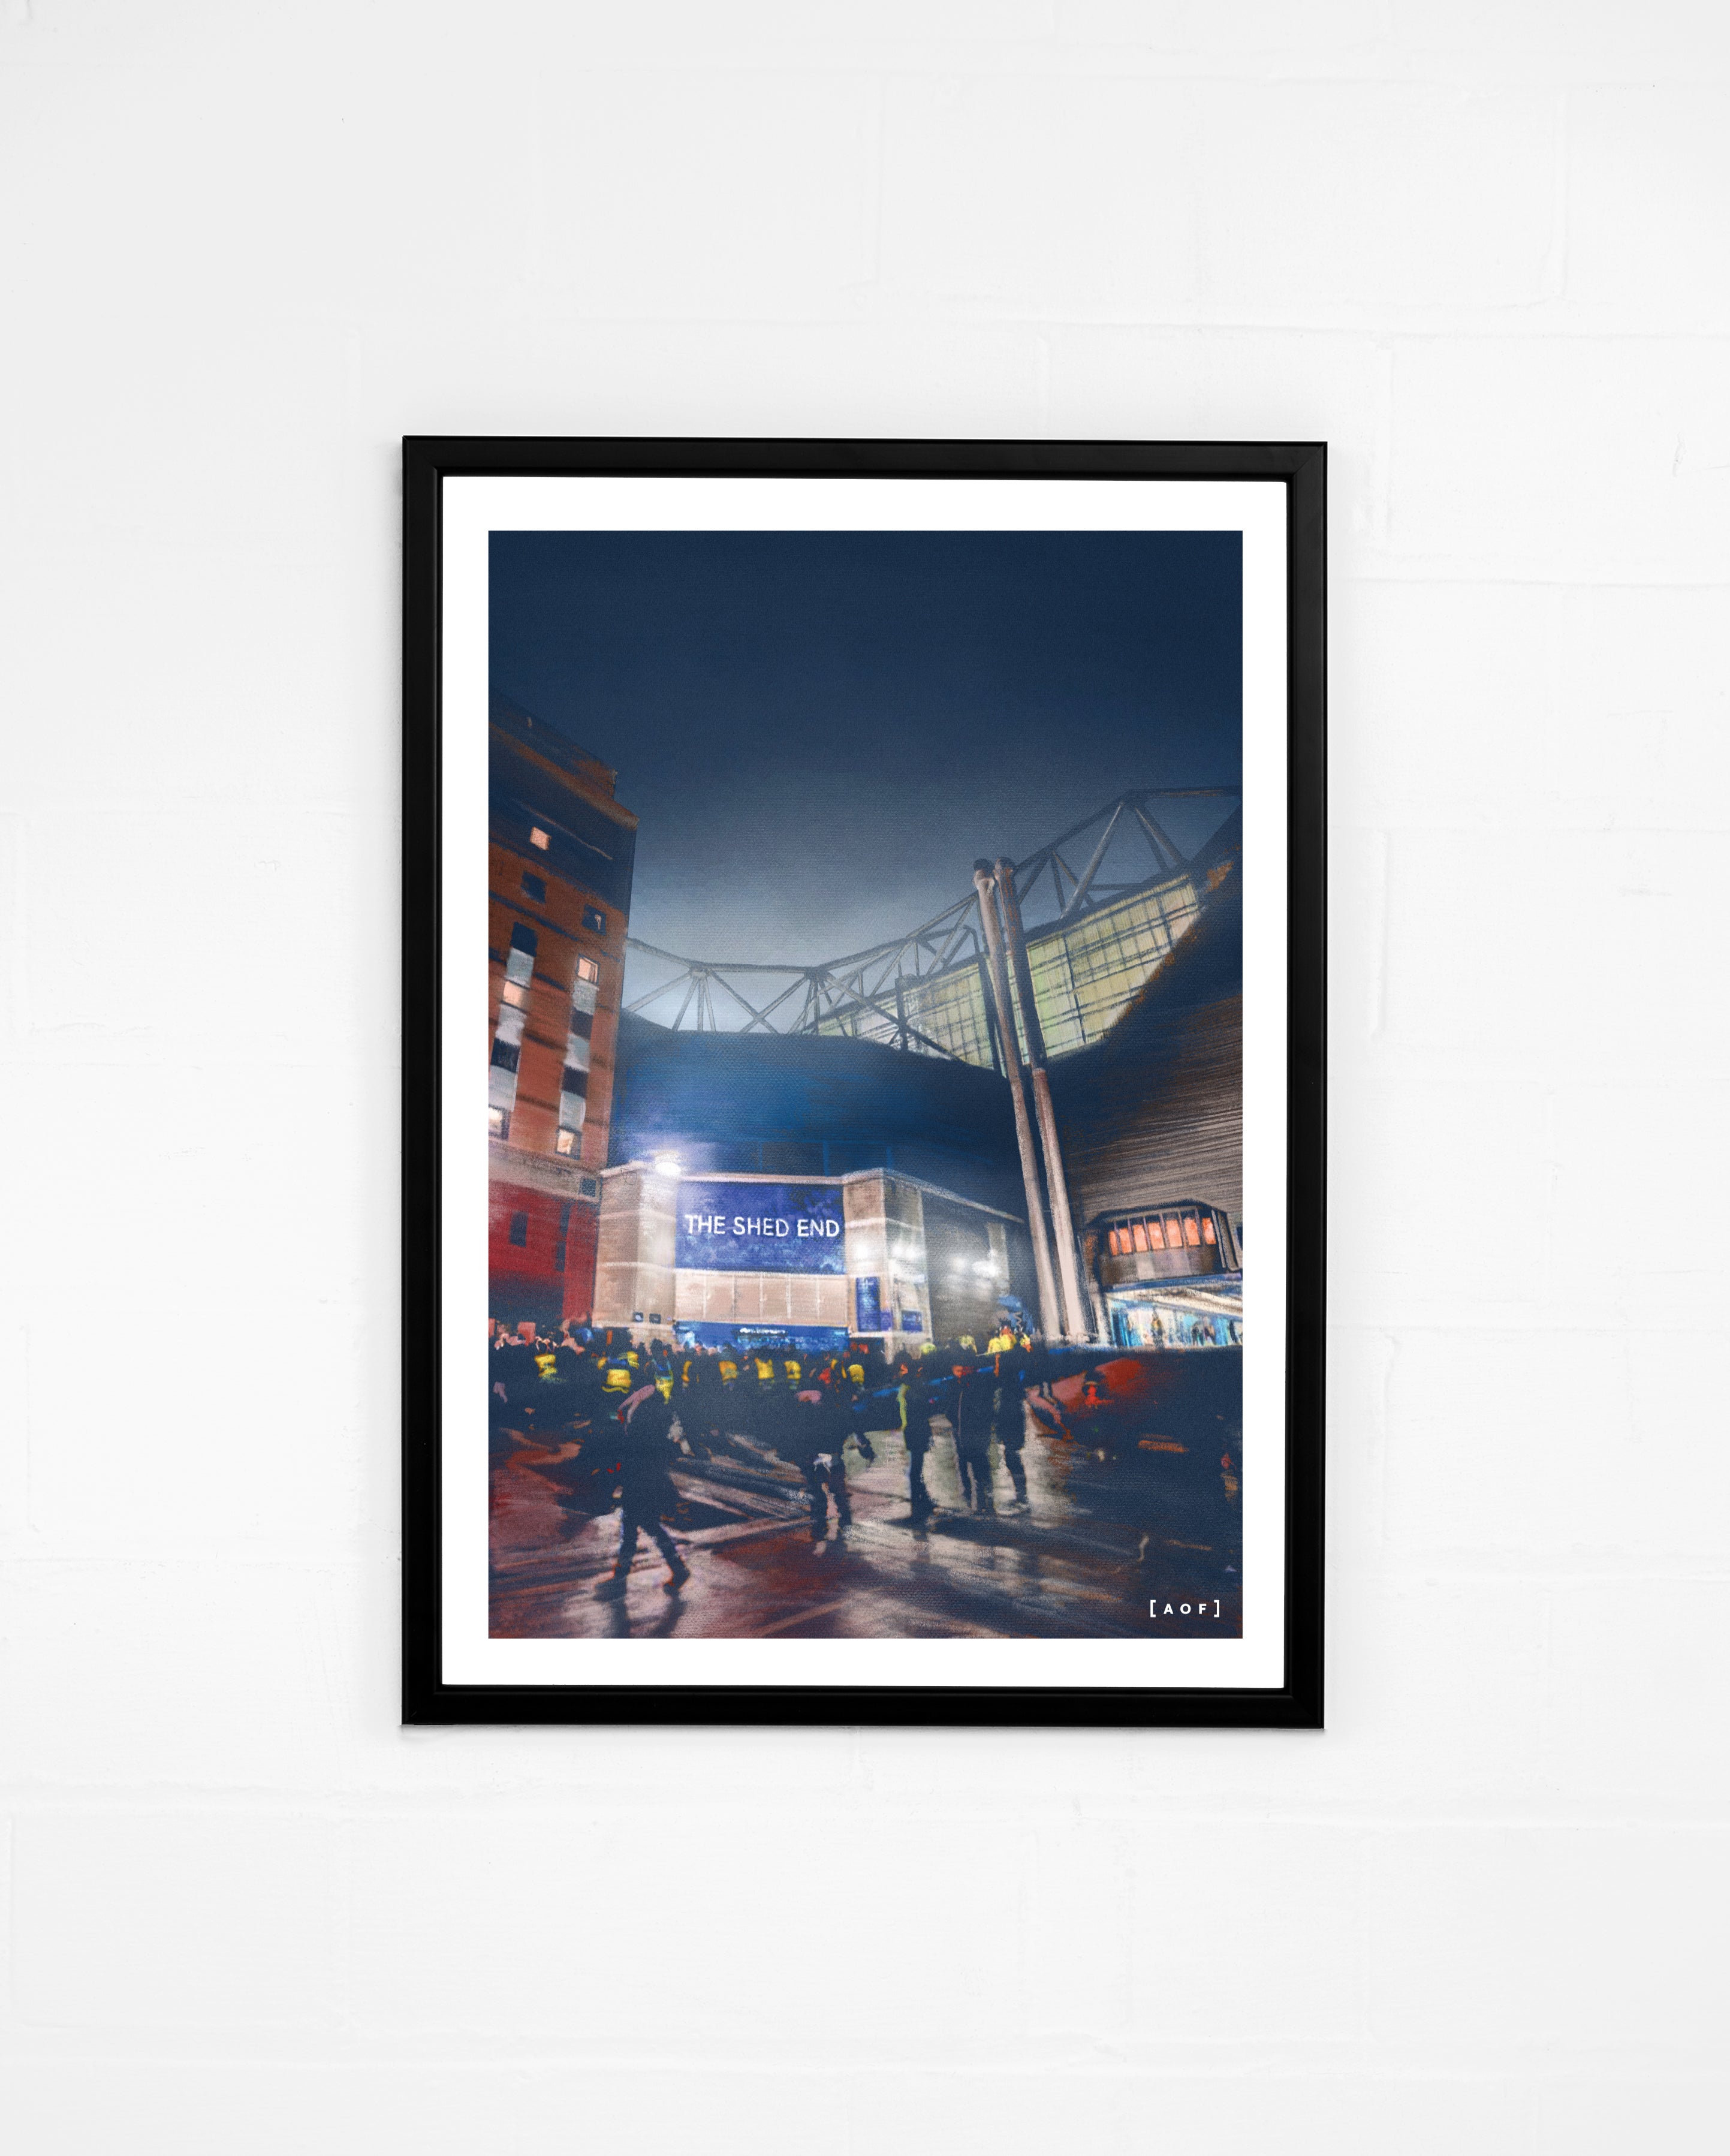 Shed End by Night - Print